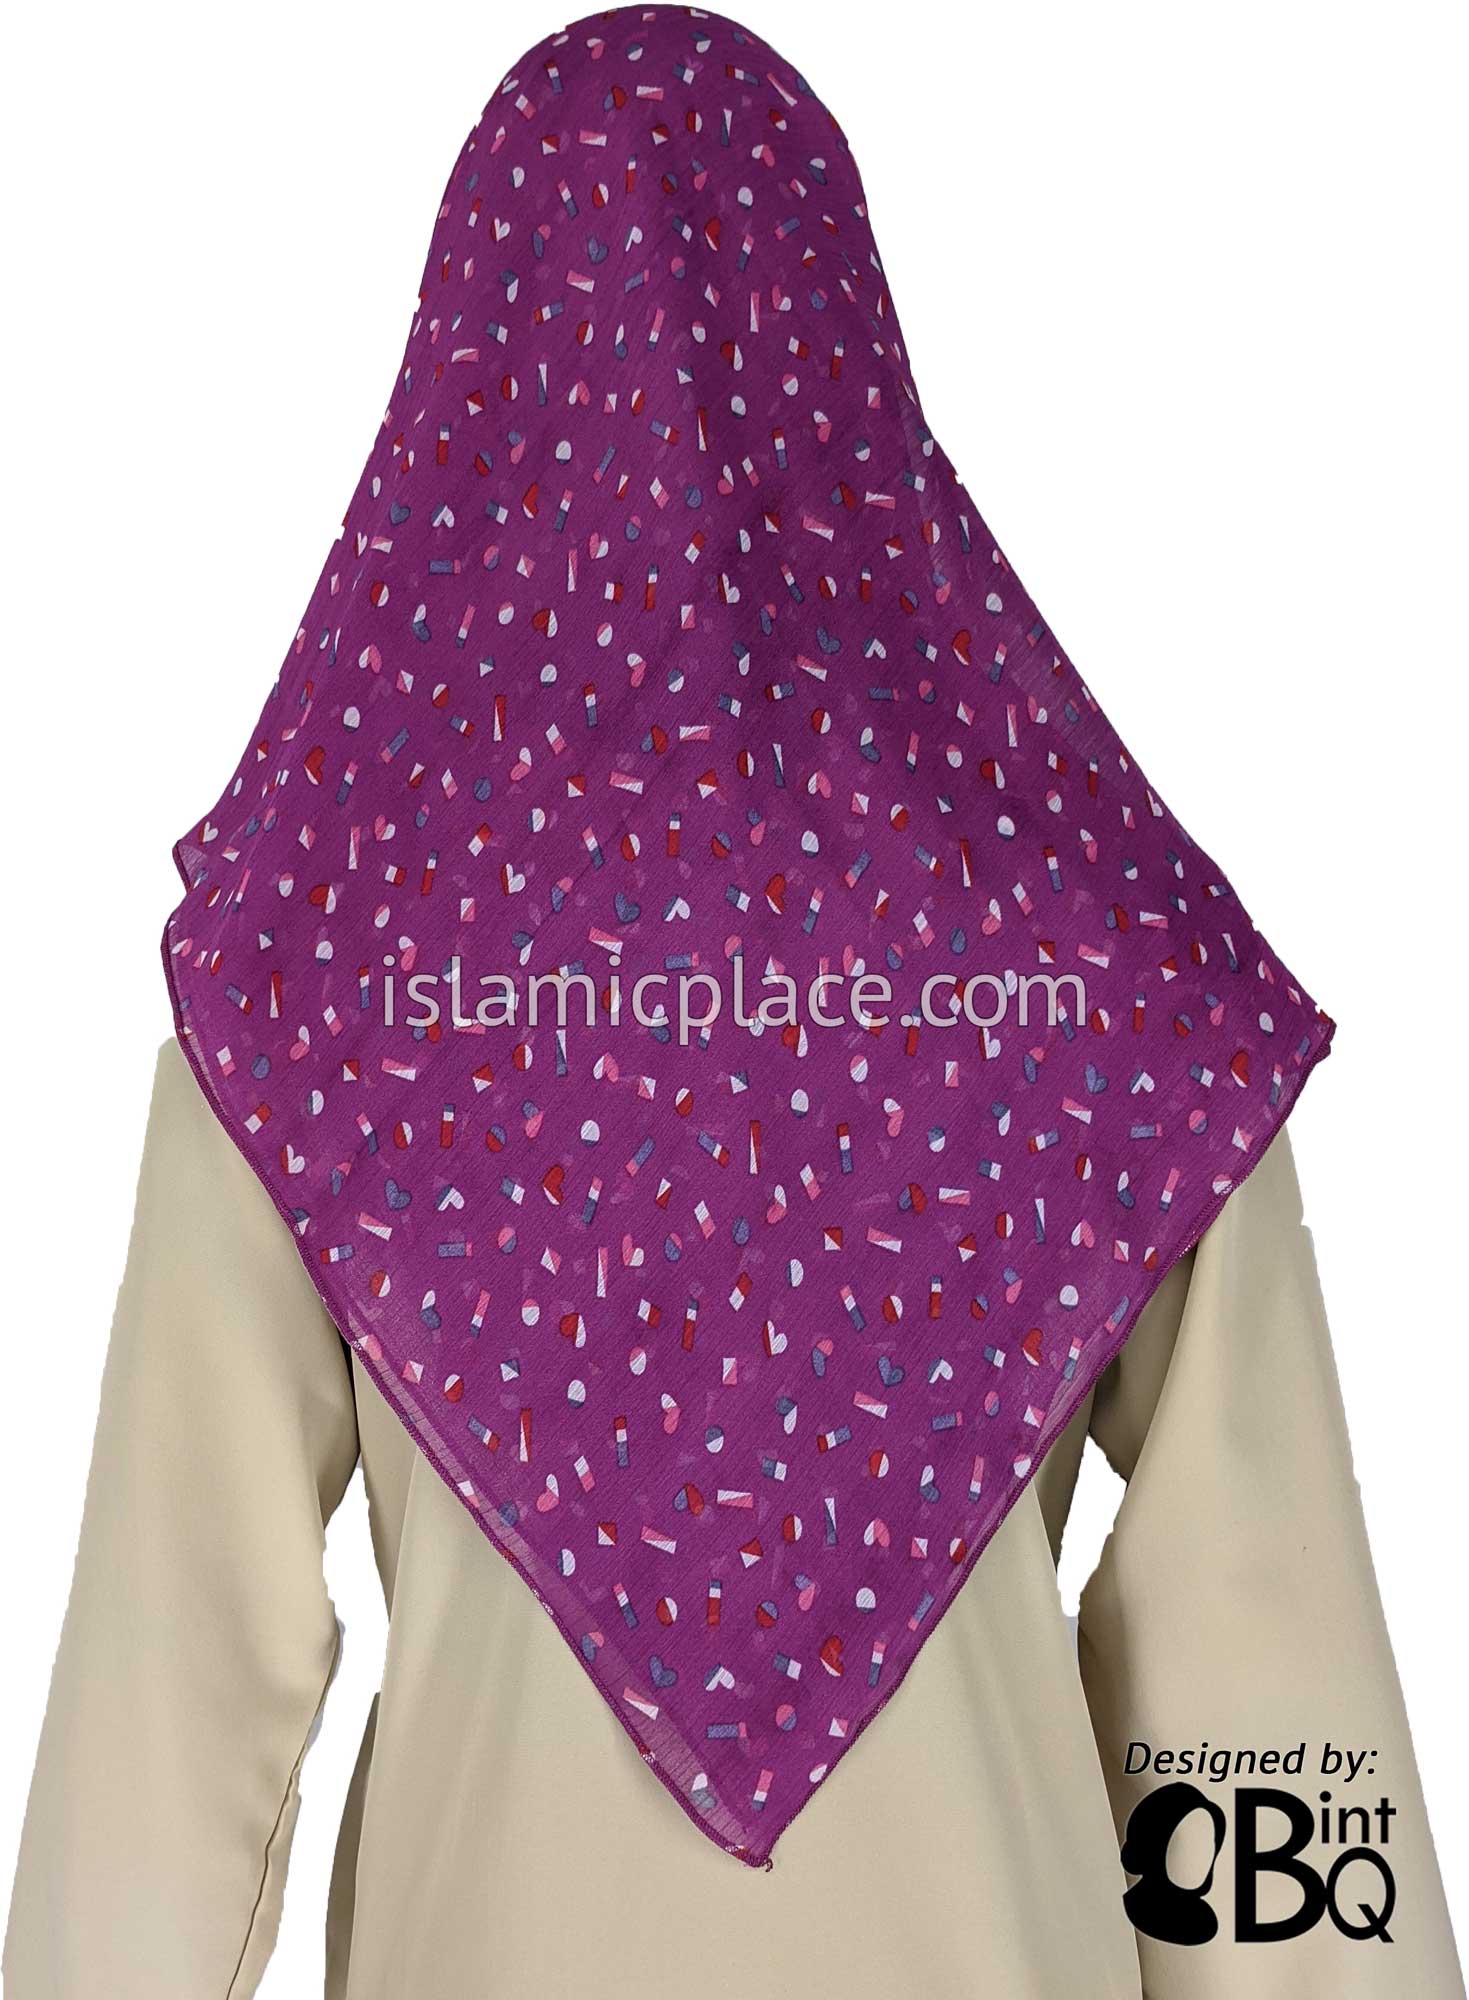 Confetti including Hearts on Magenta - 45" Square Printed Khimar